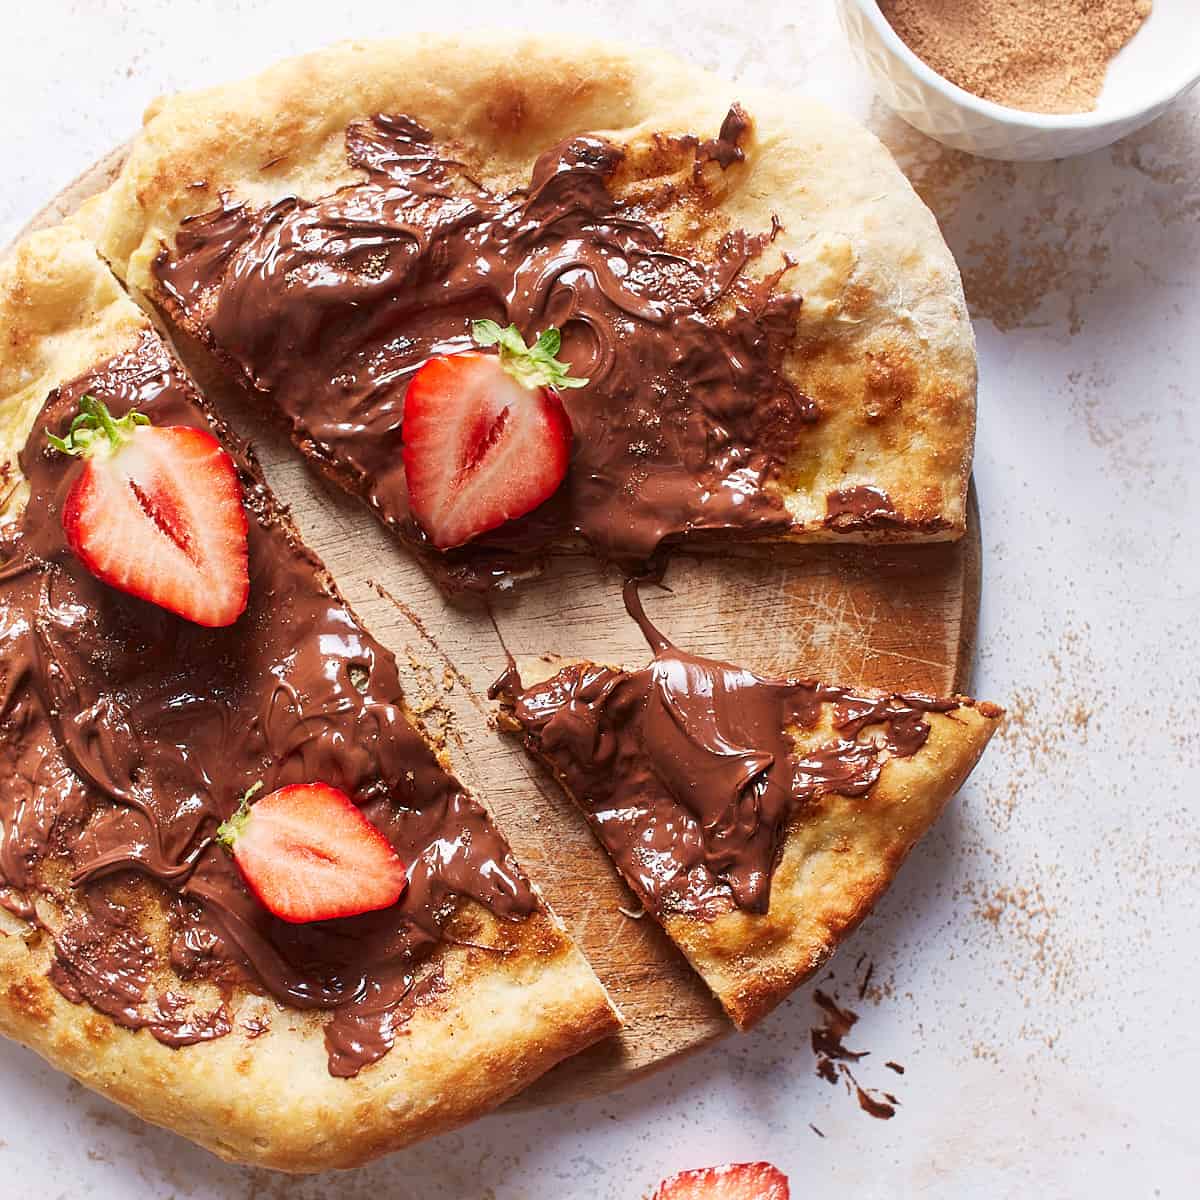 Baked nutella pizza sliced and decorated